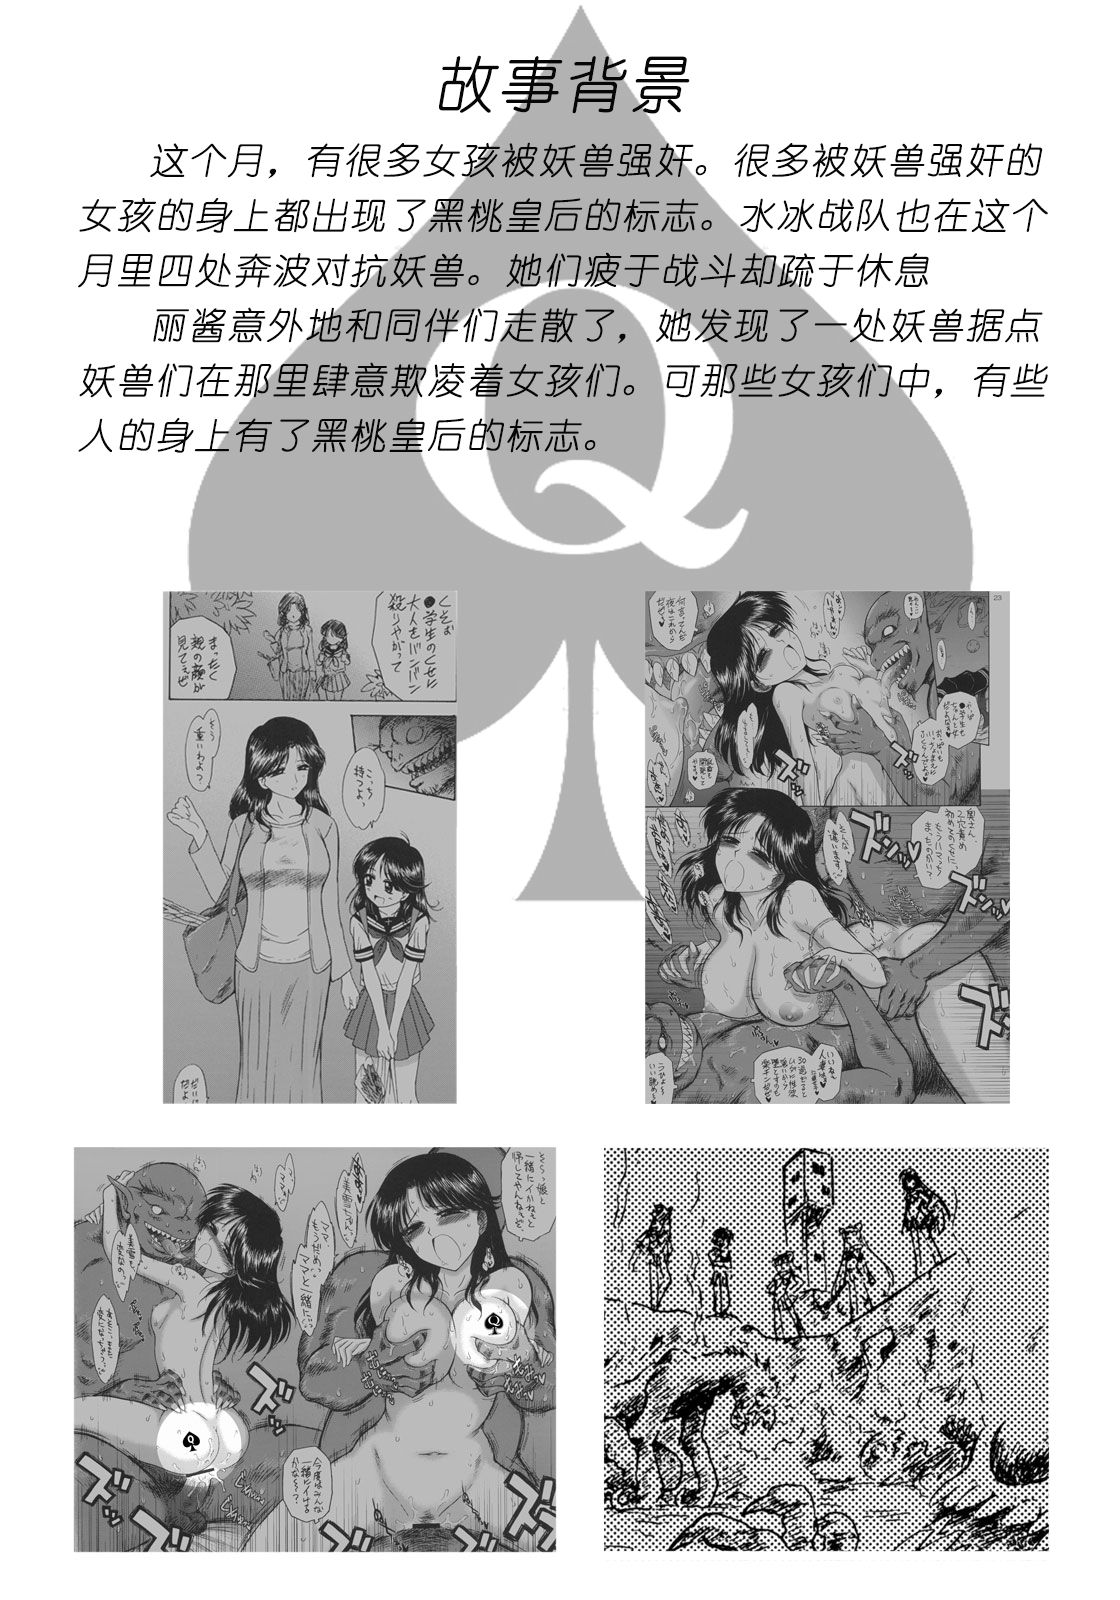 [(Black Dog)(Kuroinu Juu)] QUEEN OF SPADES [Fanmade][Chinese][Library Version]